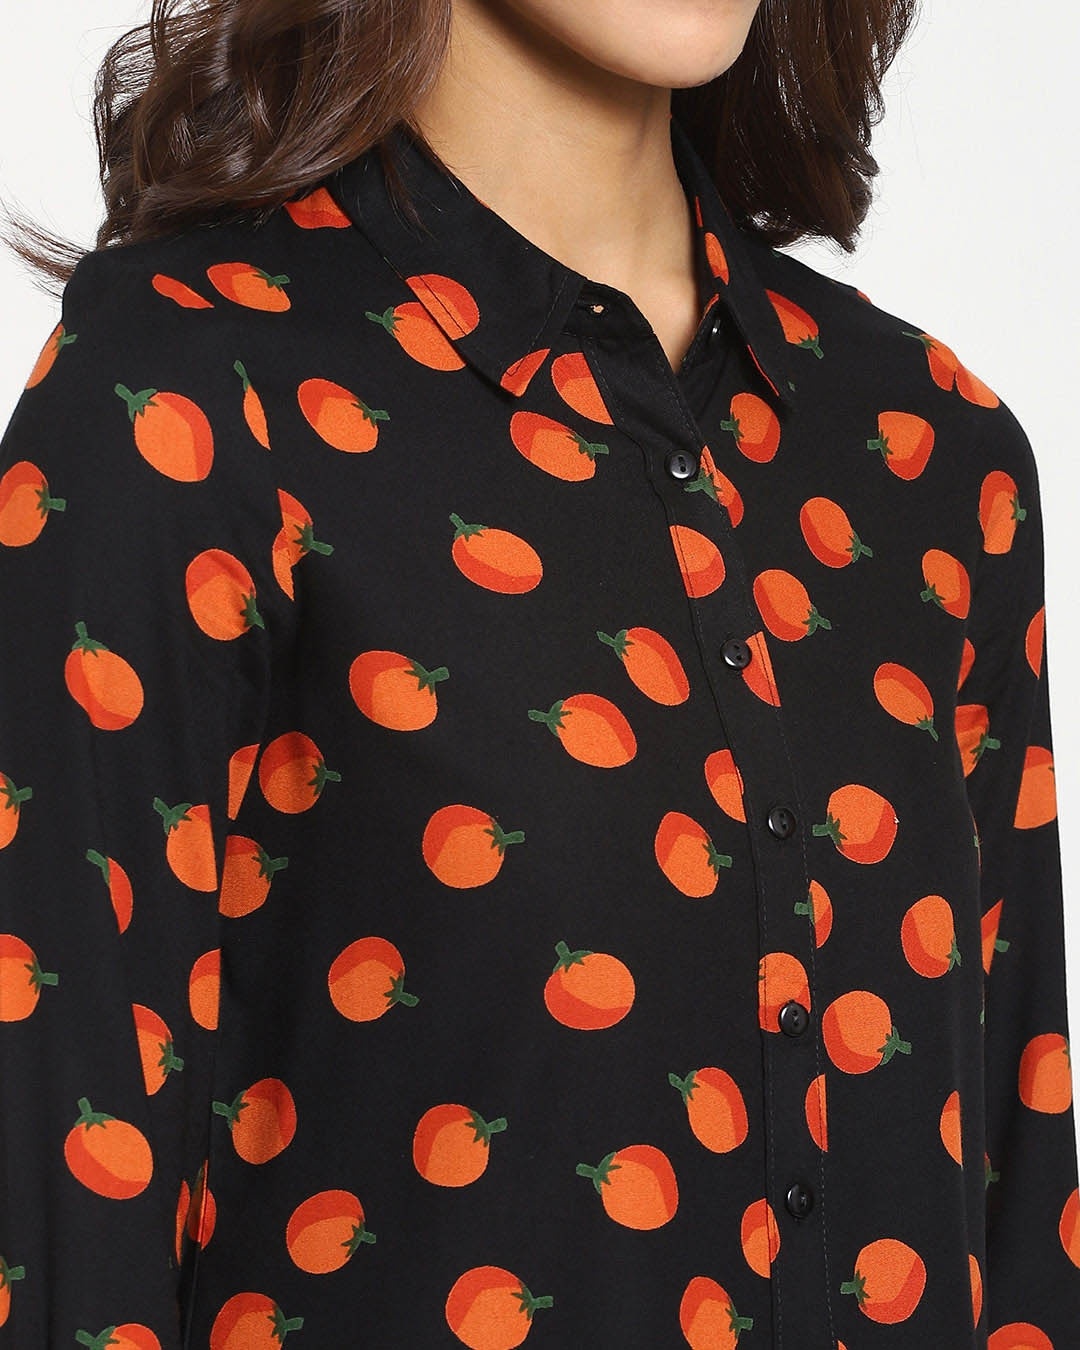 Shop Women's Black All Over Printed Casual Shirt